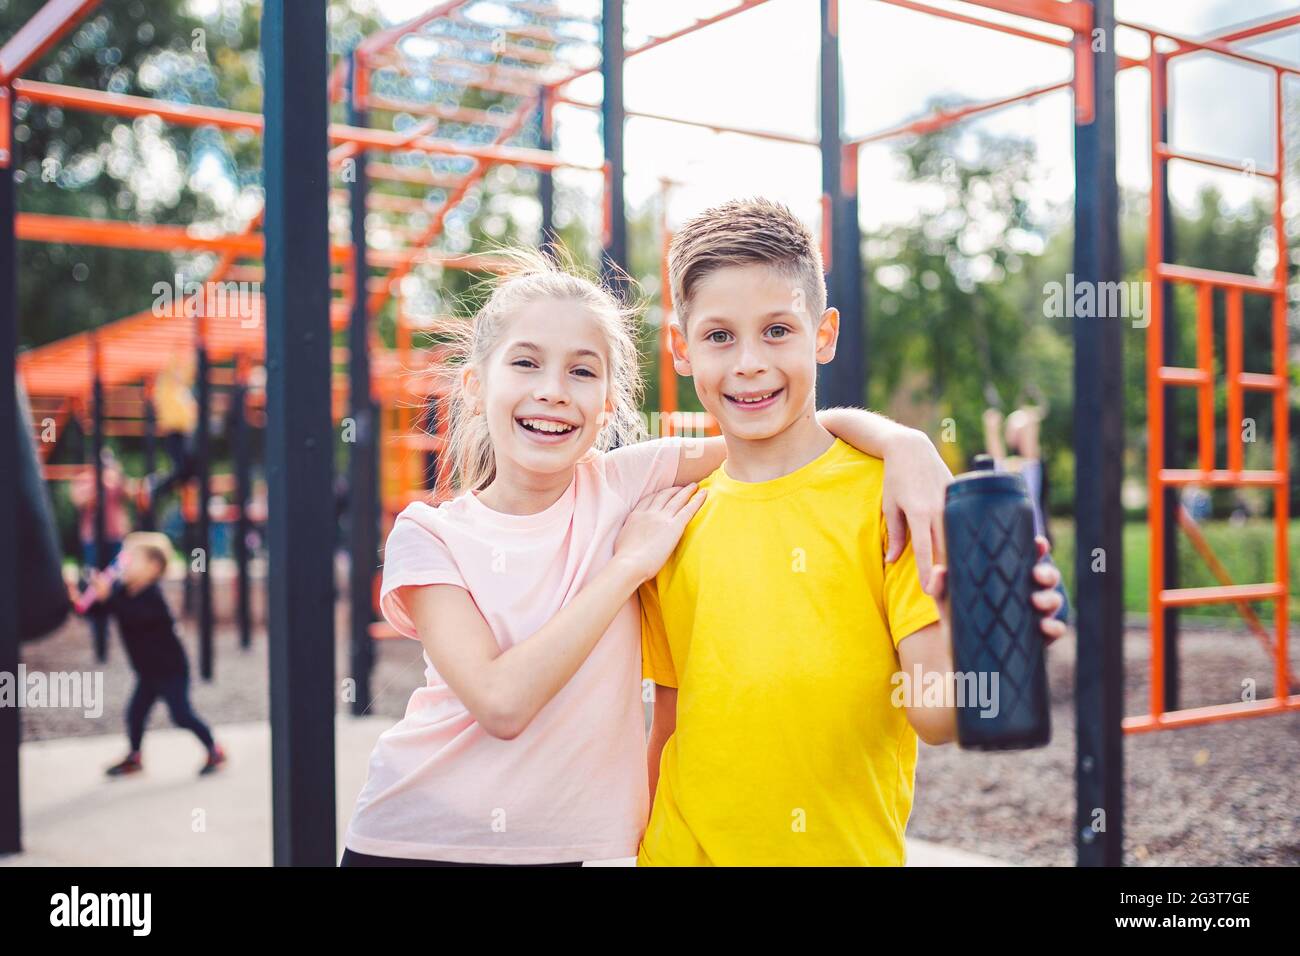 Teens children and sports theme. Two kids athletes twins rest and replenish their thirst during workout outdoor gym workout in s Stock Photo